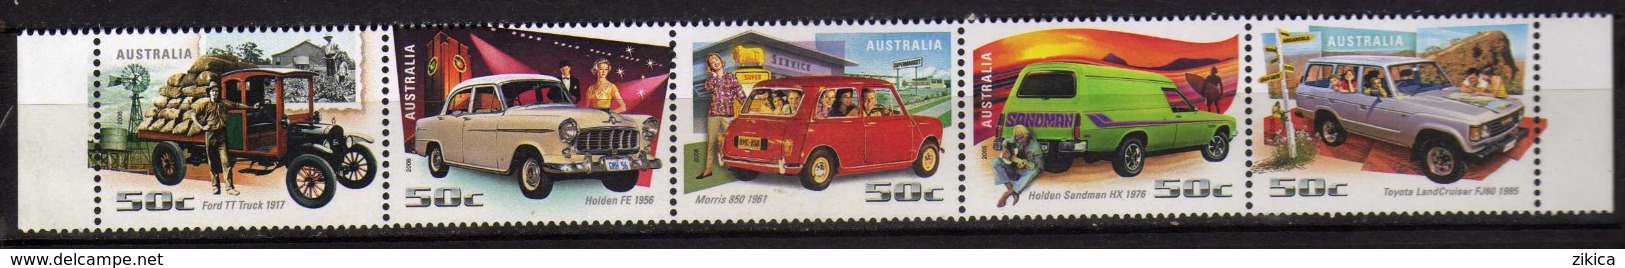 Australia 2006 Driving Through The Years.strip Of 5.Ford,Toyota,Holden,Morris,surfing.MINT/MNH - Mint Stamps